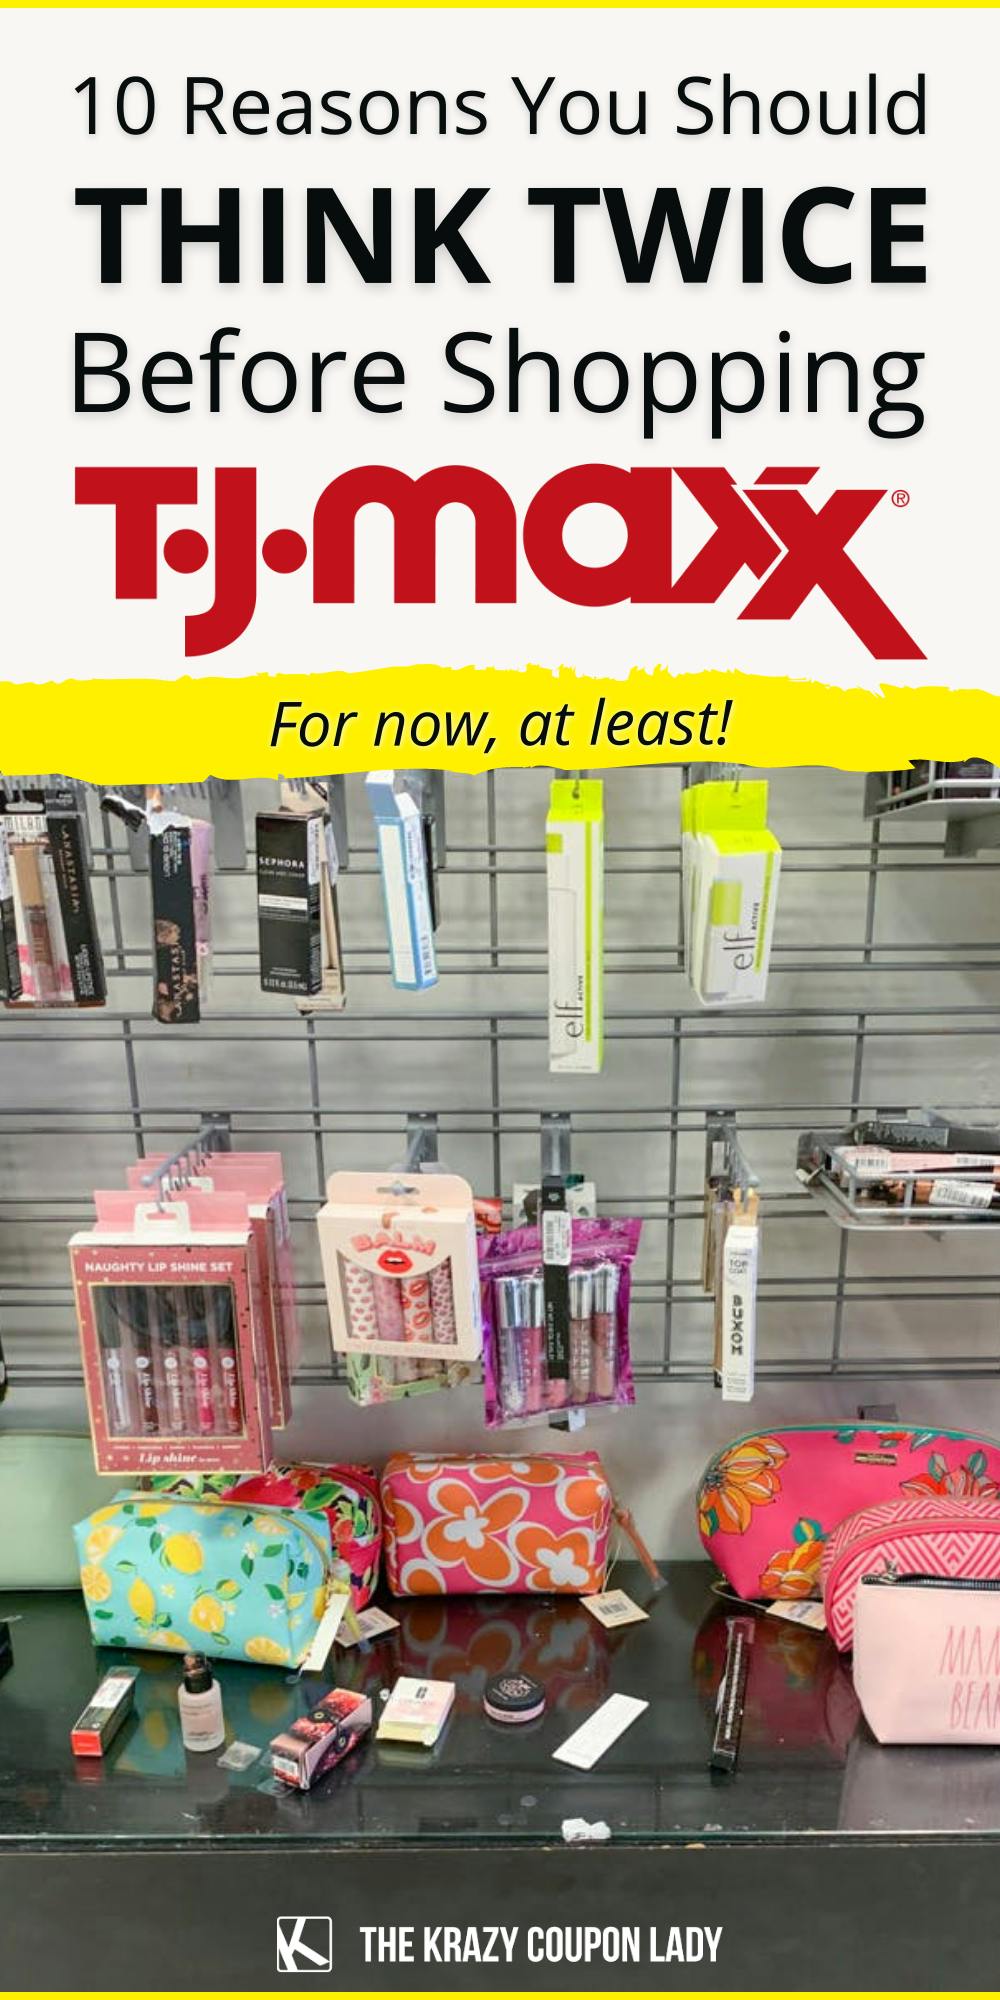 10 Reasons You Should Think Twice About Shopping T.J.Maxx